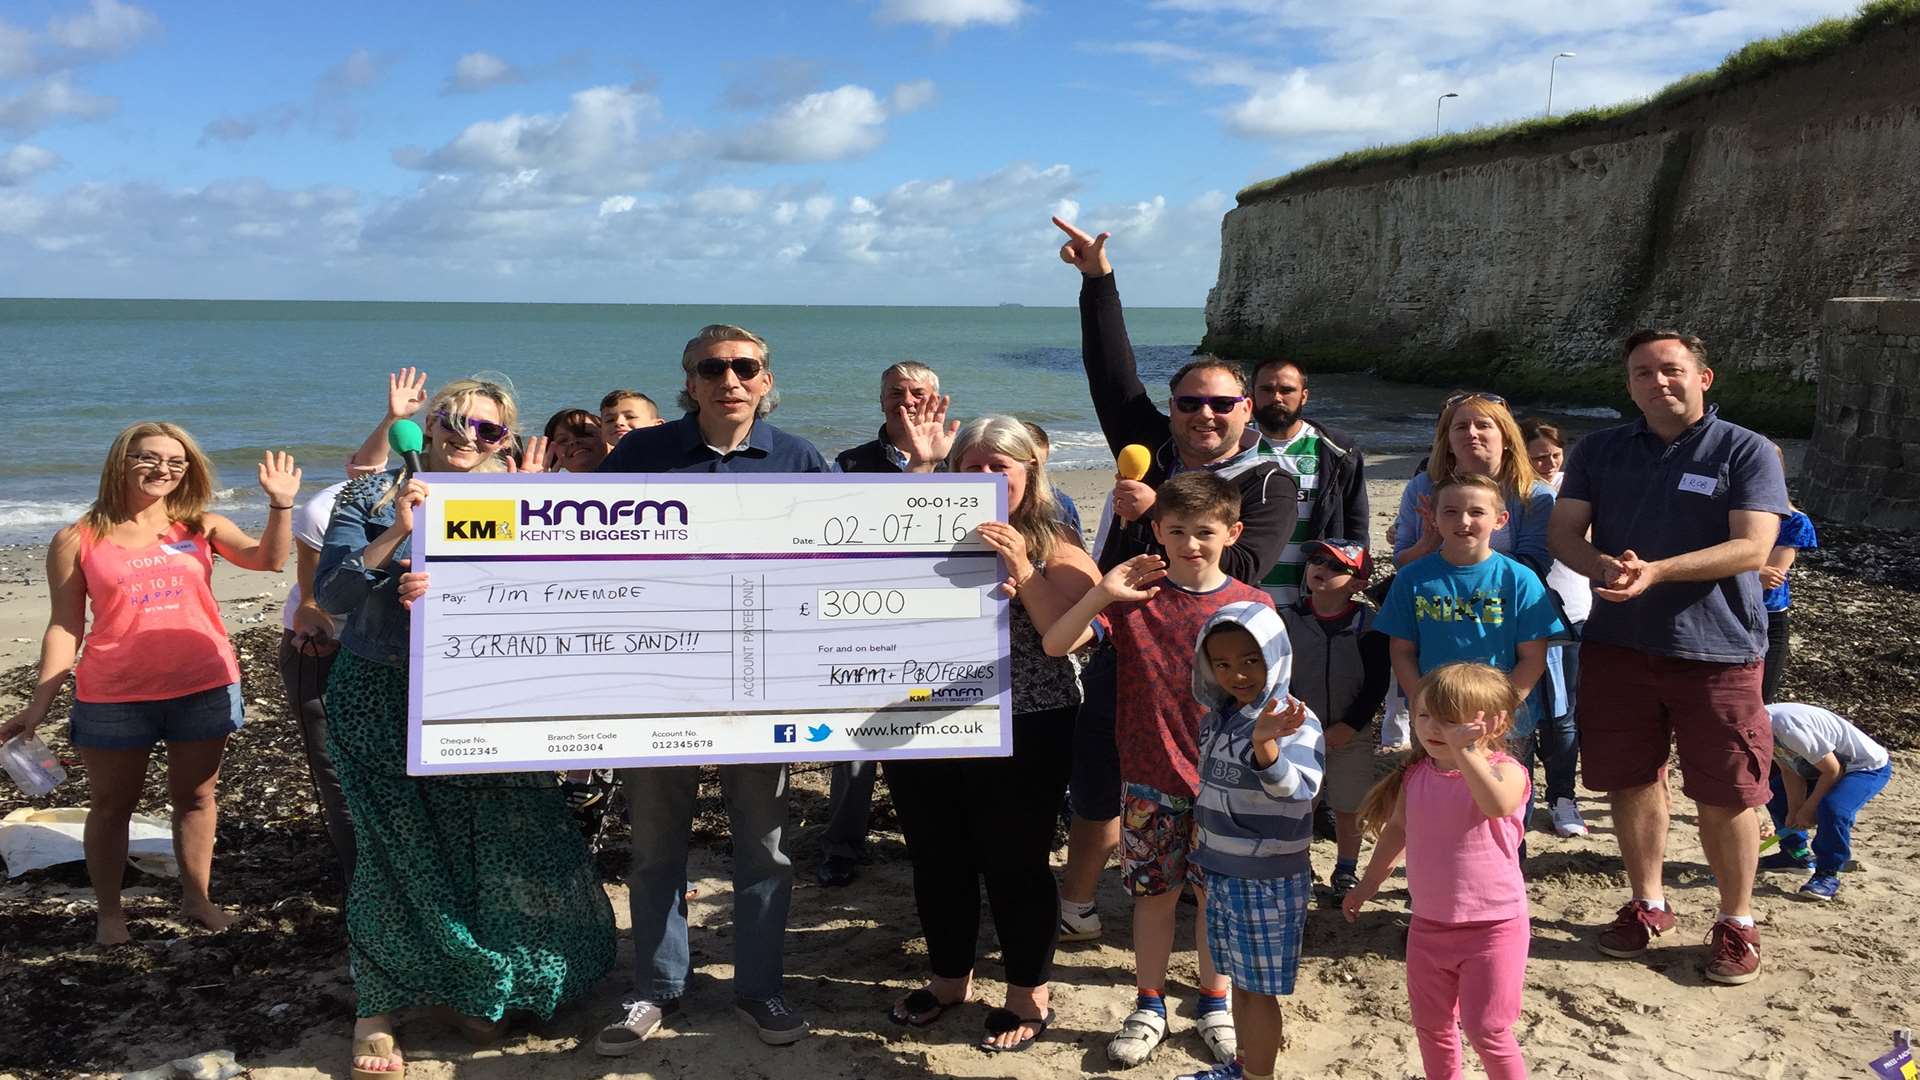 Tim Finemore from Dover with his £3,000 prize cheque, courtesy of kmfm's 3 Grand in the Sand contest